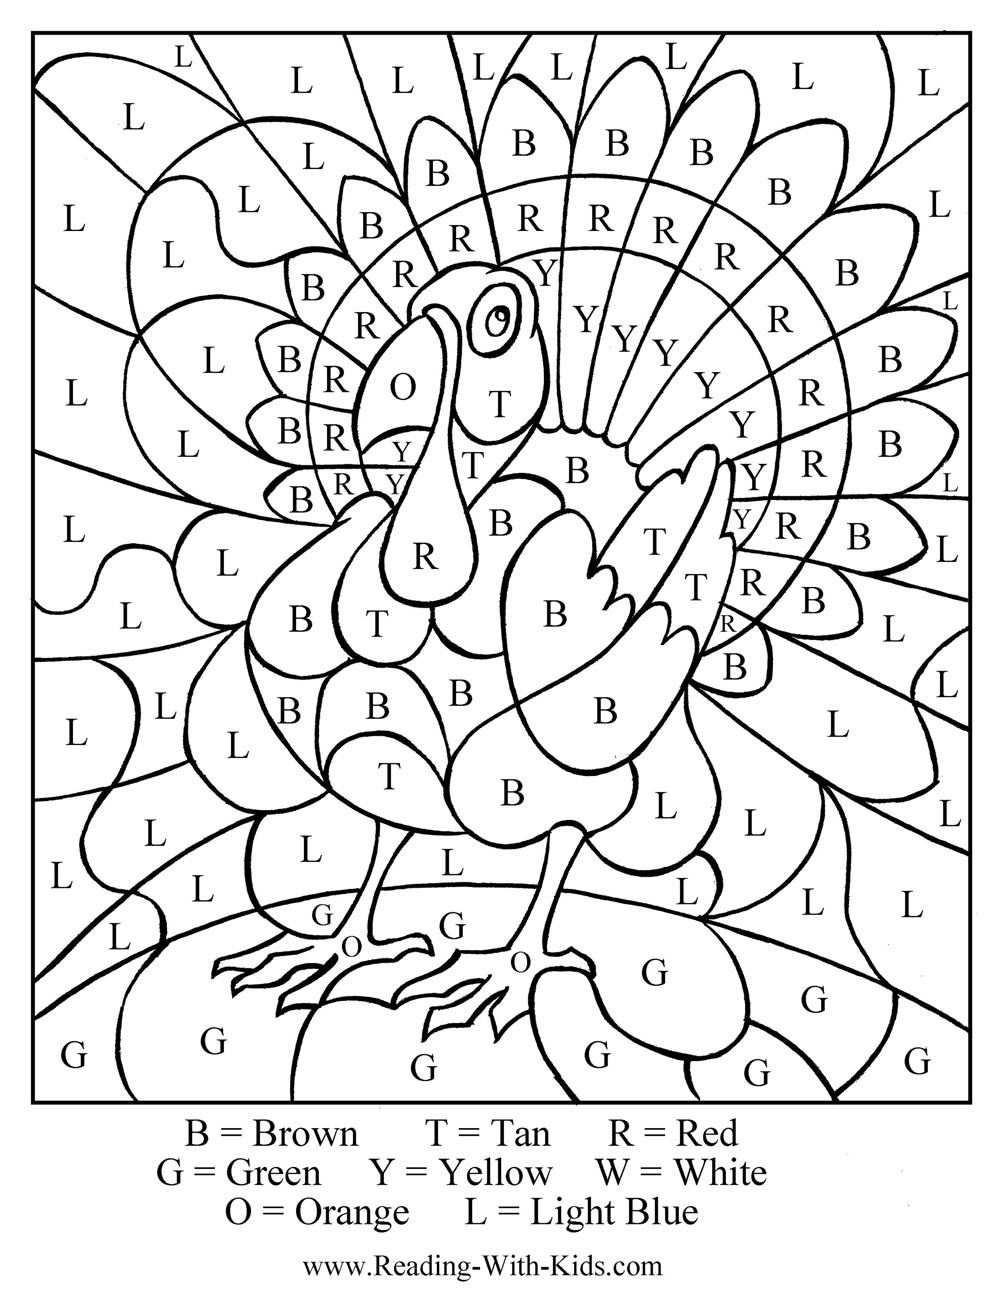 Free Printable Thanksgiving Placemats From Reading With Kids - Free Printable Thanksgiving Coloring Placemats